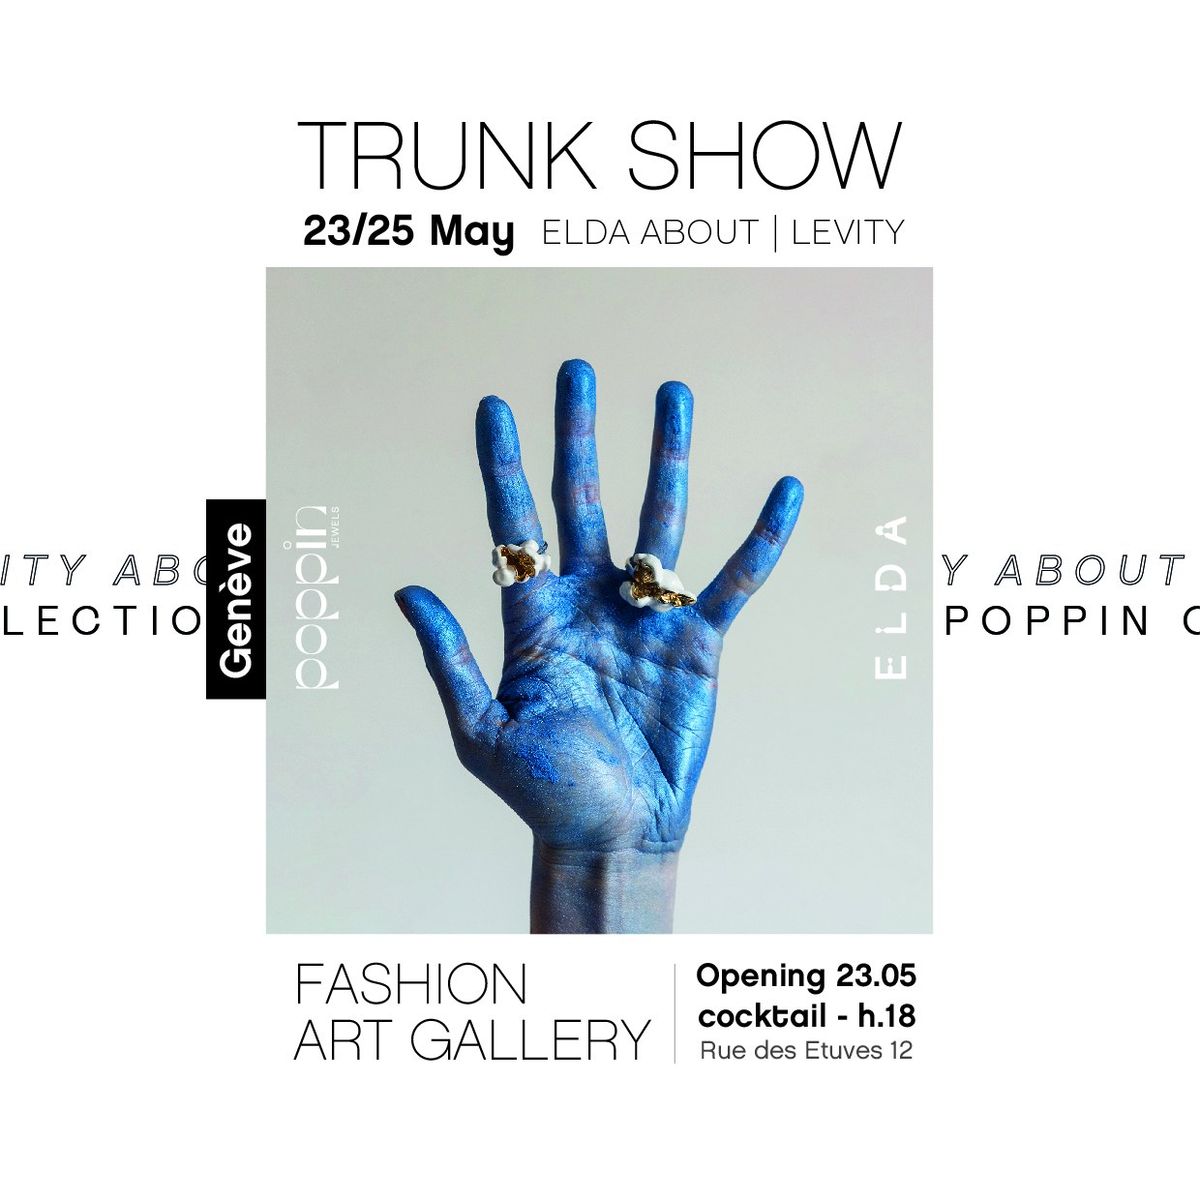 Trunk Show - 3 days events